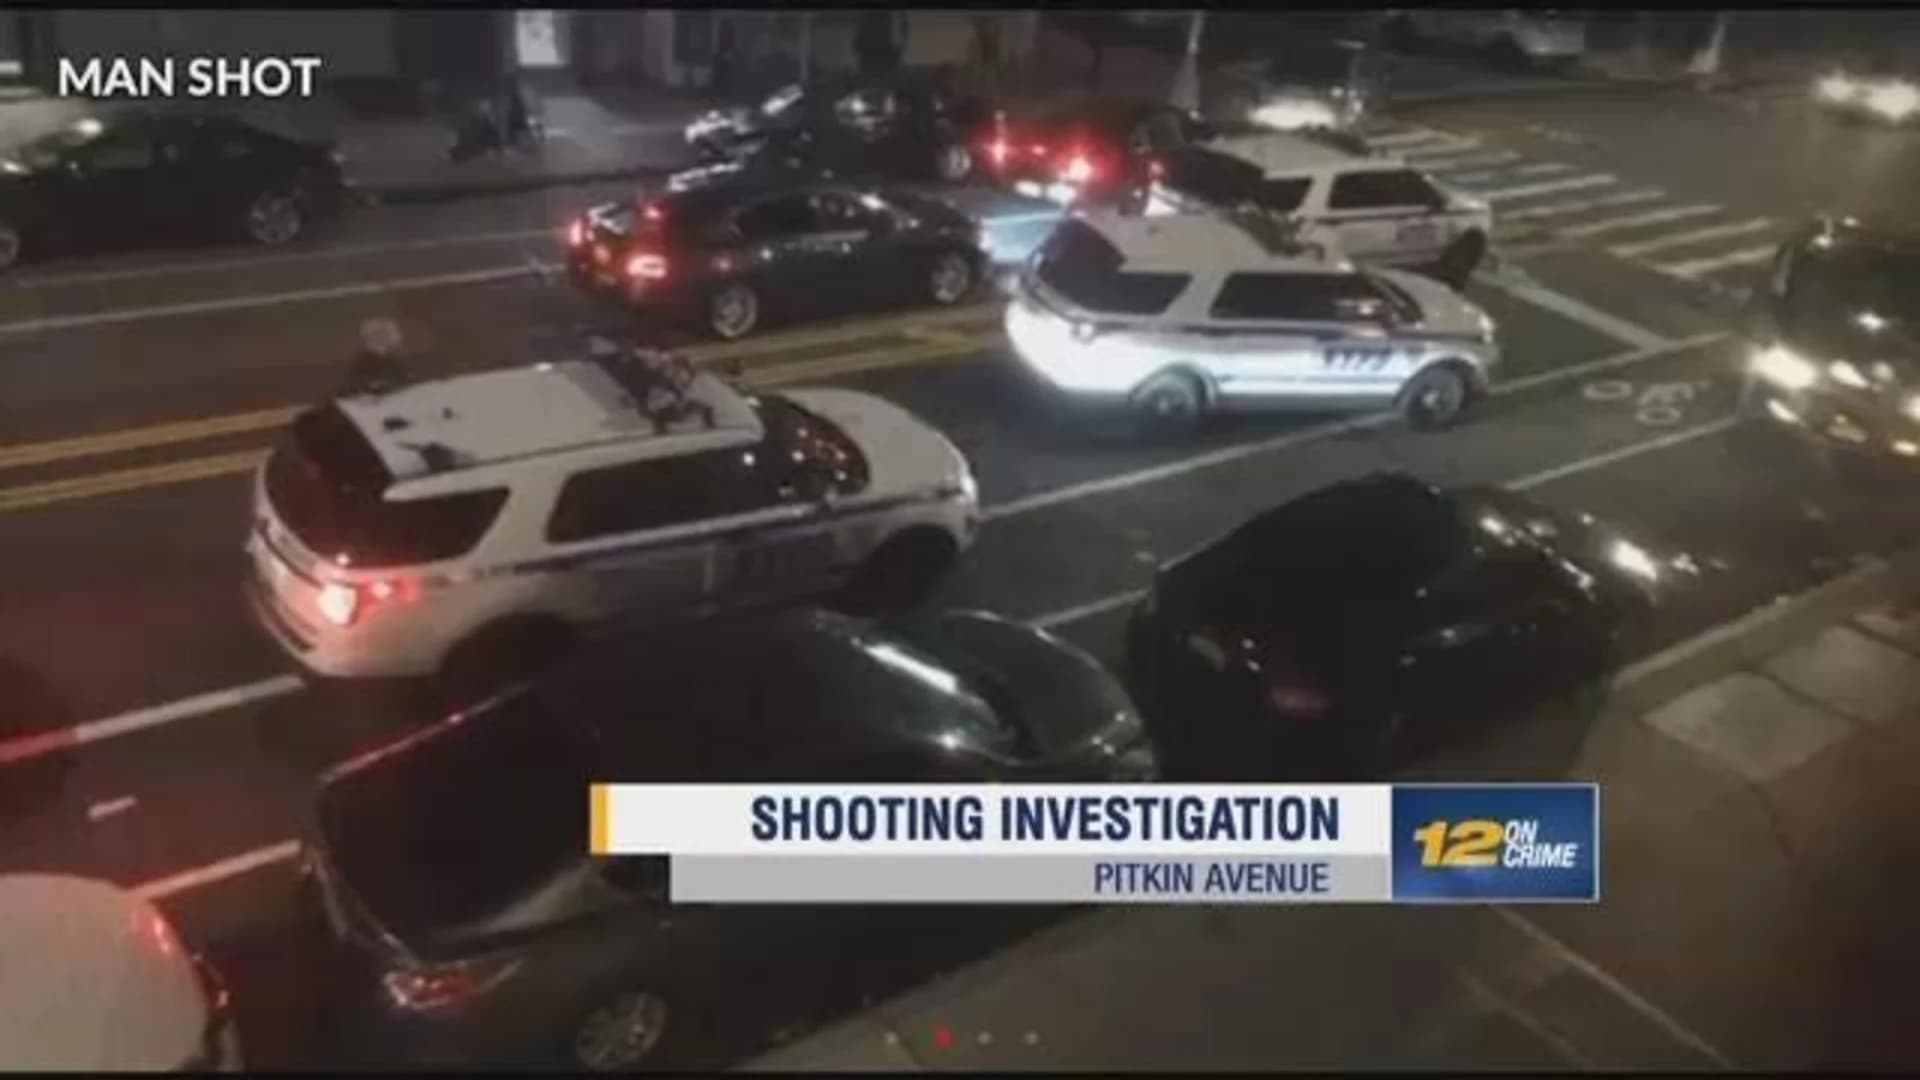 Man shot in the head in front of busy deli